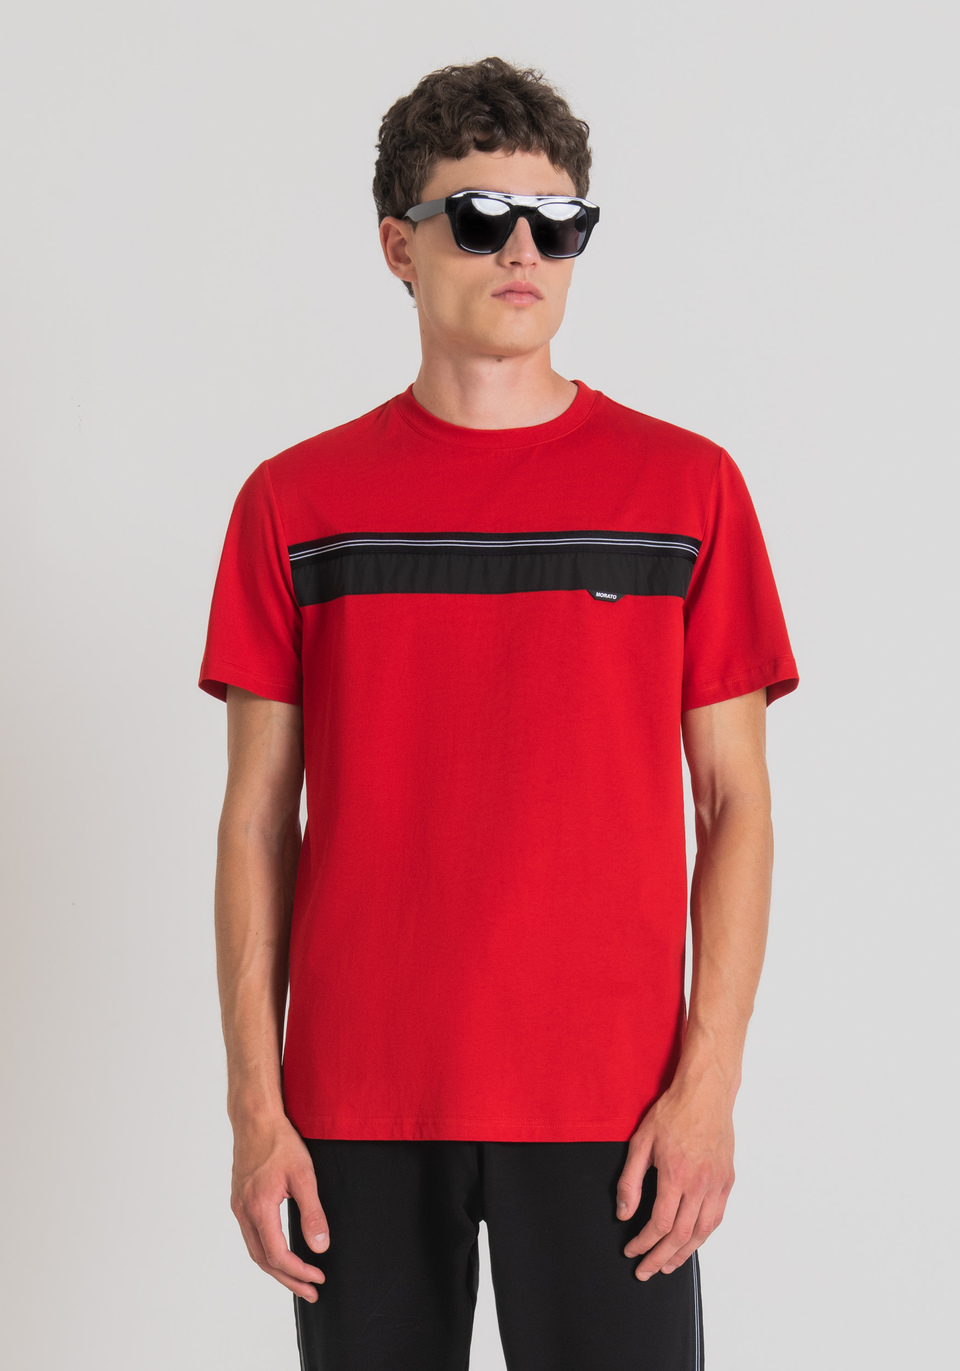 REGULAR FIT T-SHIRT IN SOFT COTTON WITH CONTRASTING BAND - Antony Morato Online Shop